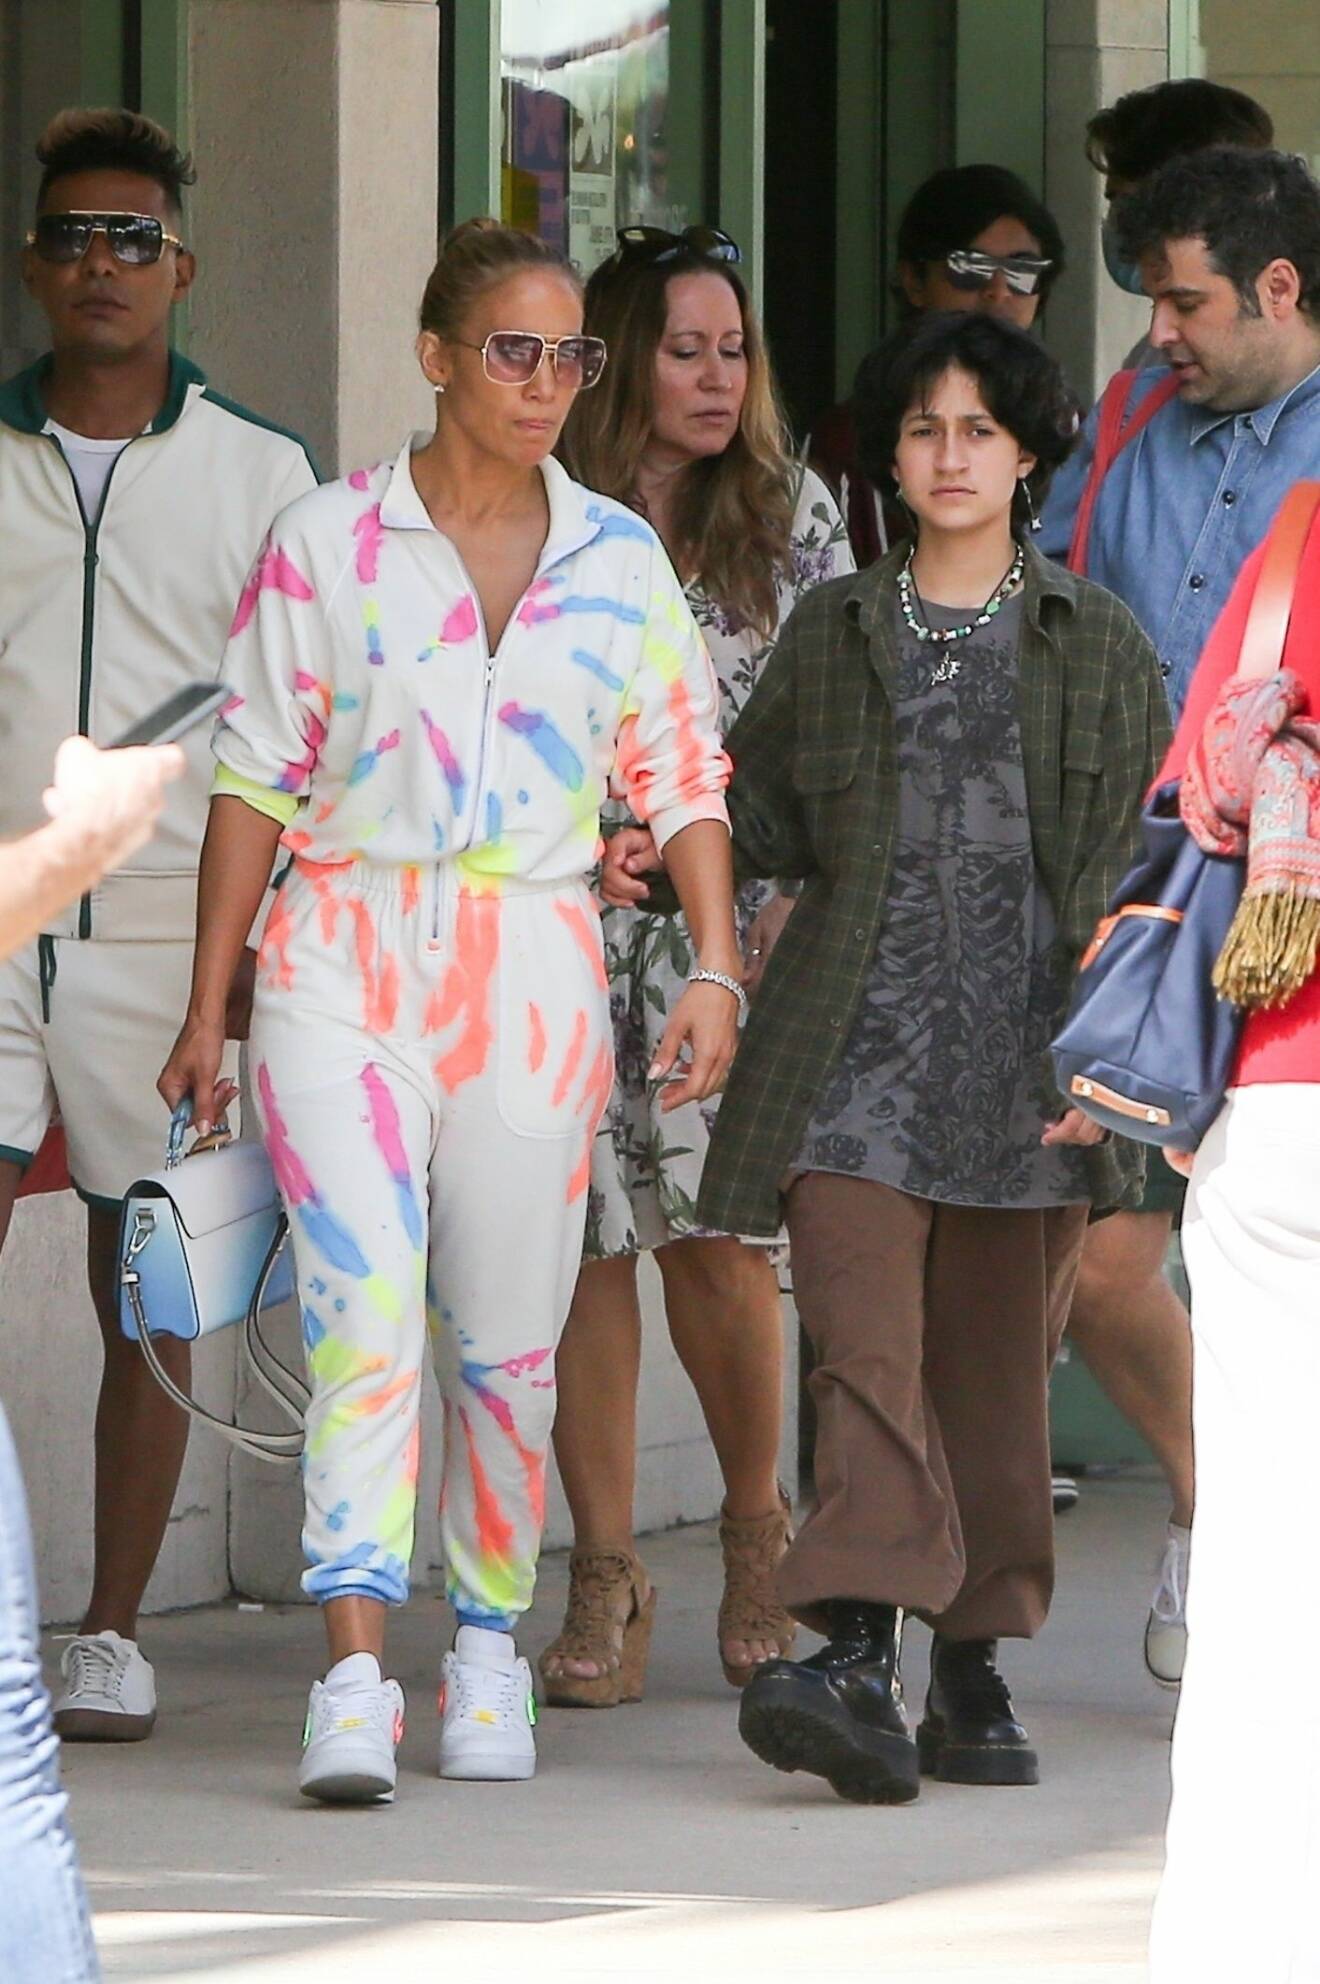 Miami 2021-06-09Miami, FL - *EXCLUSIVE* - Jennifer Lopez rocks a multicolored jumpsuit and matching Nike's with a Louis Vuitton purse as she goes out for a bite with her kids Emme and Max, and friends in Miami, Florida, while her new beau Ben Affleck relaxes in California.Pictured: Jennifer Lopez, Emme Maribel Muniz, Maximilian David Muniz 9 JUNI 2021